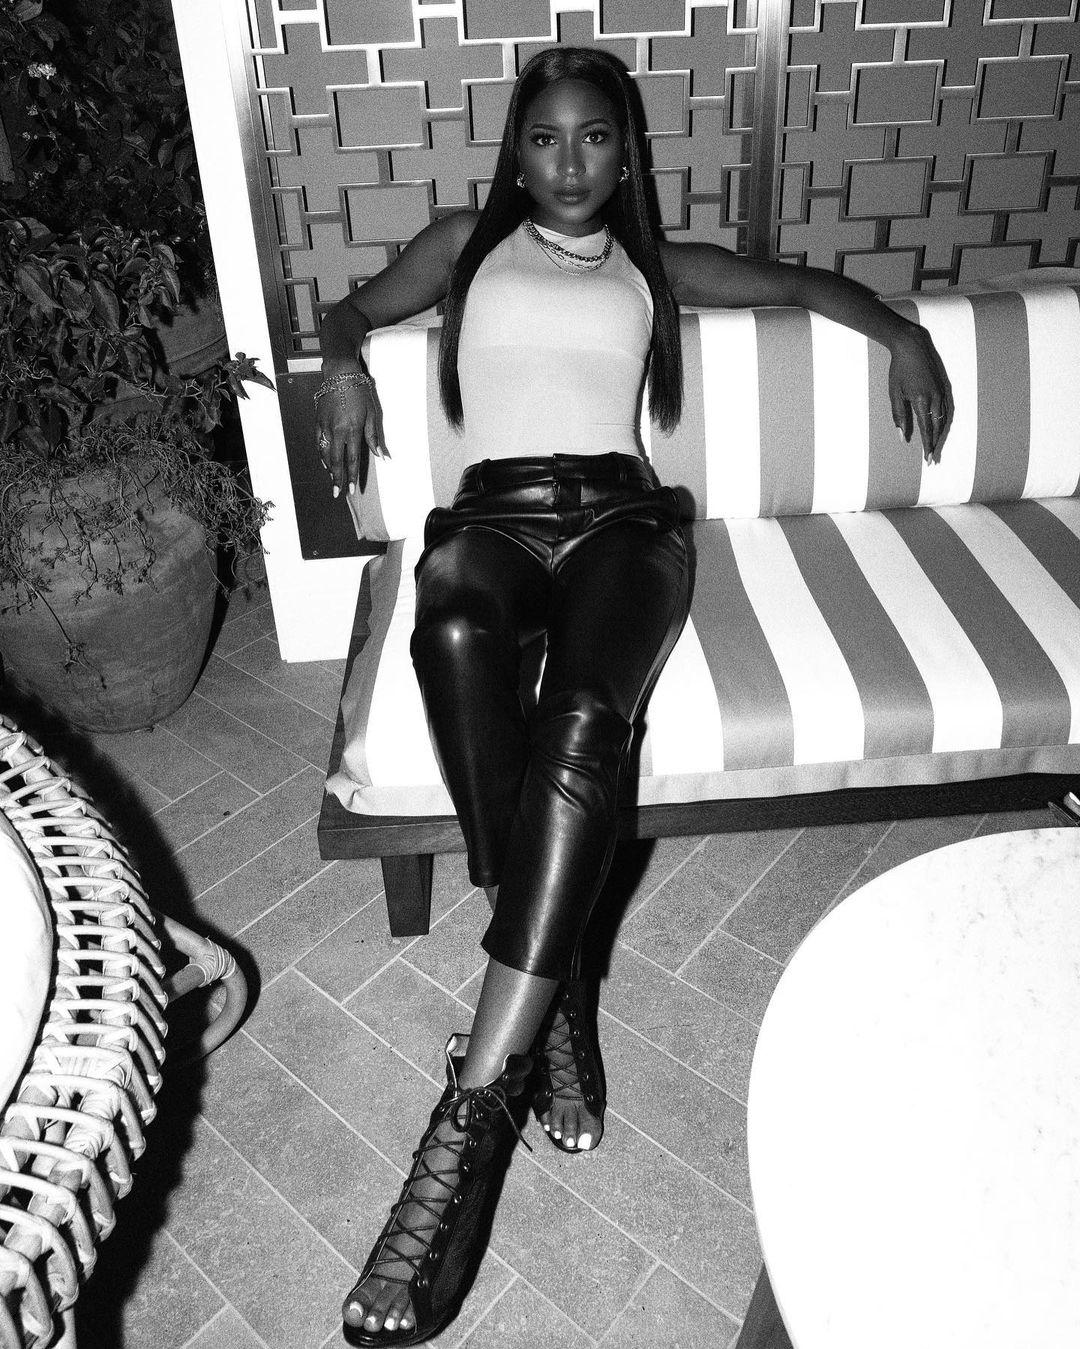 A black and white themed photo showing Carlacia Grant in a black and white outfit.